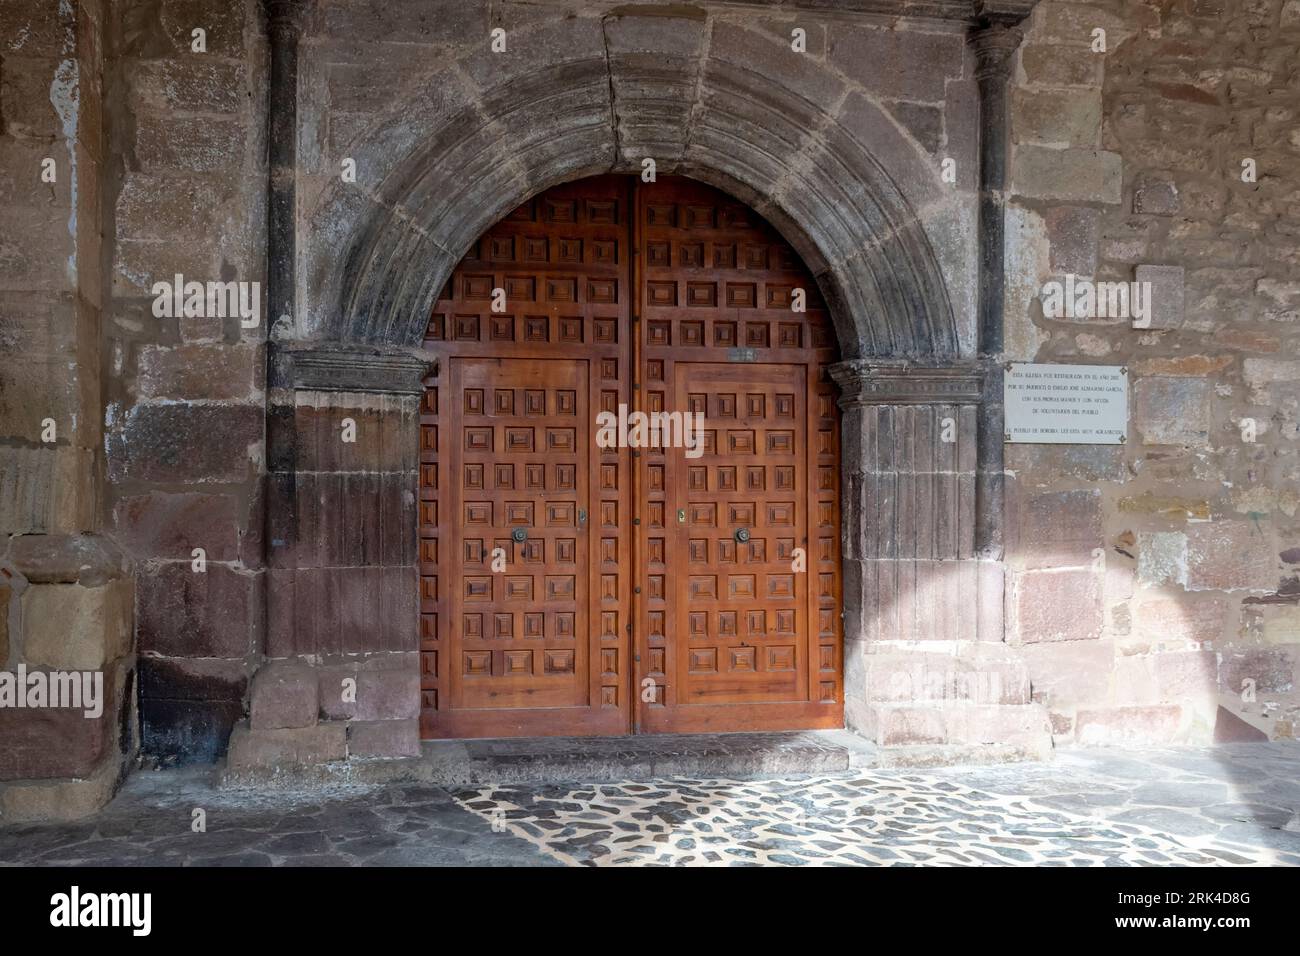 This stunning photograph captures the intricate details of the entrance door of Nuestra Señora de la Asunción, a beautiful church located in the charm Stock Photo